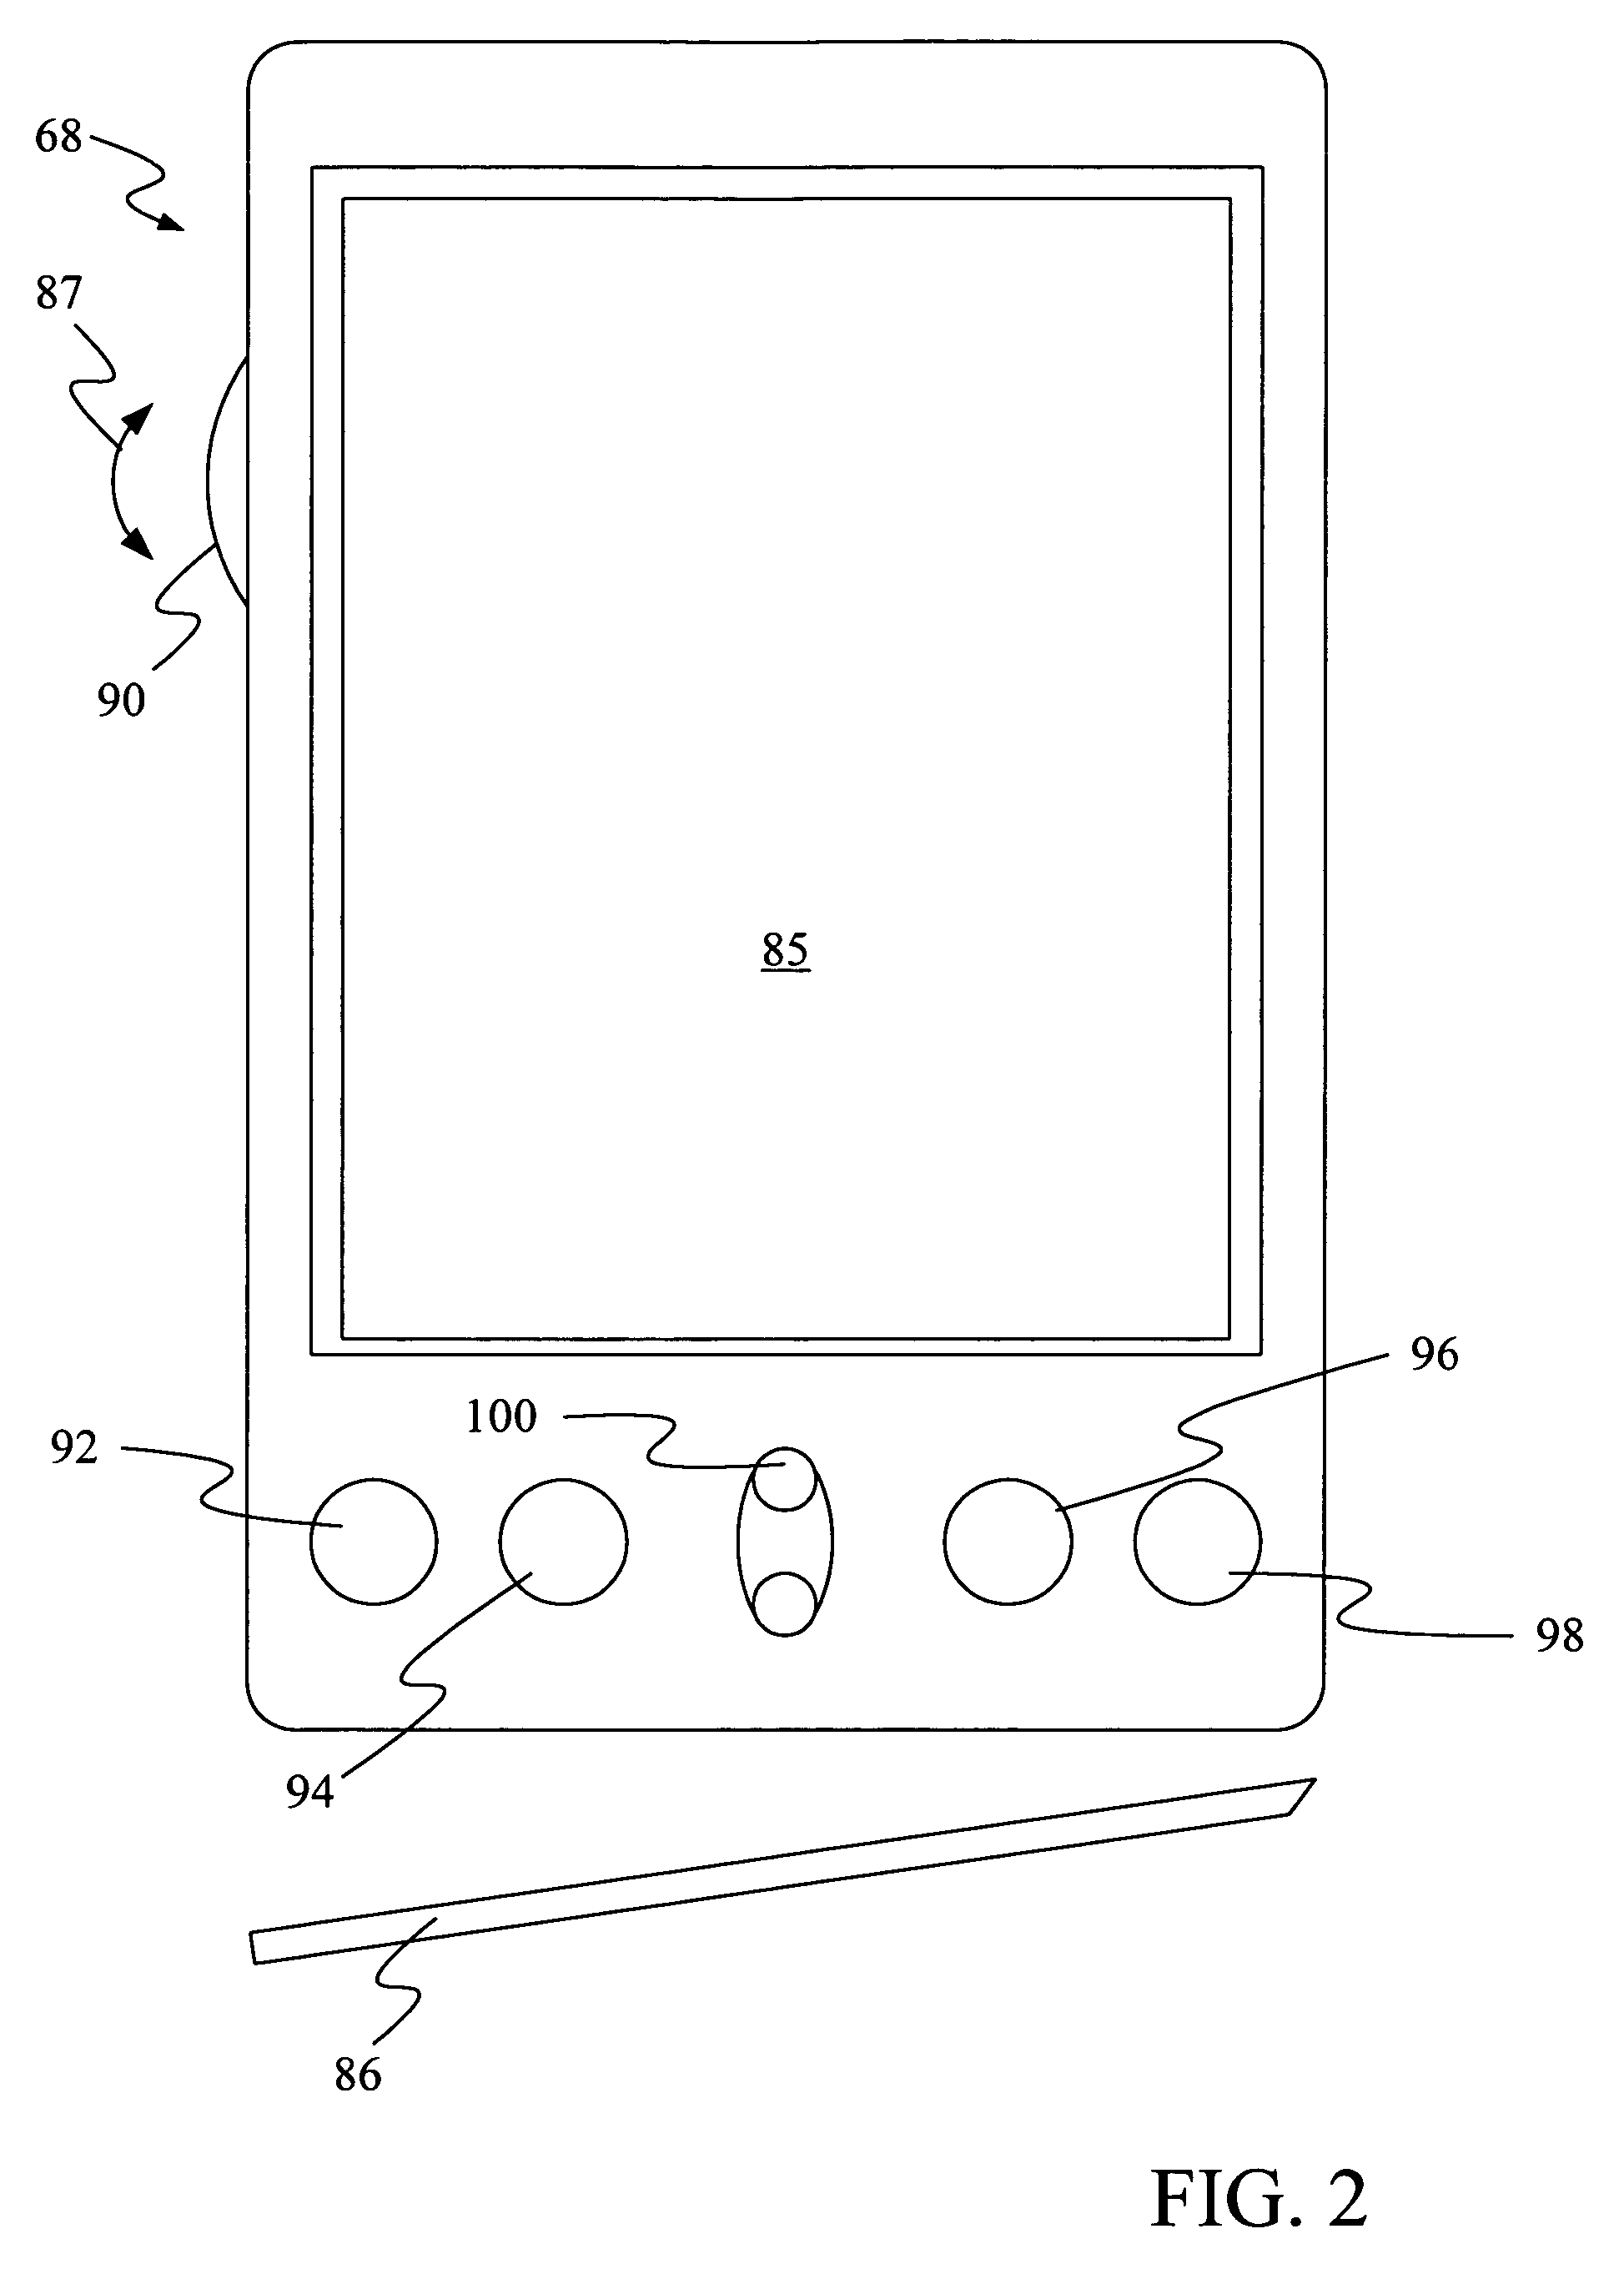 Method and apparatus for providing context menus on a hand-held device